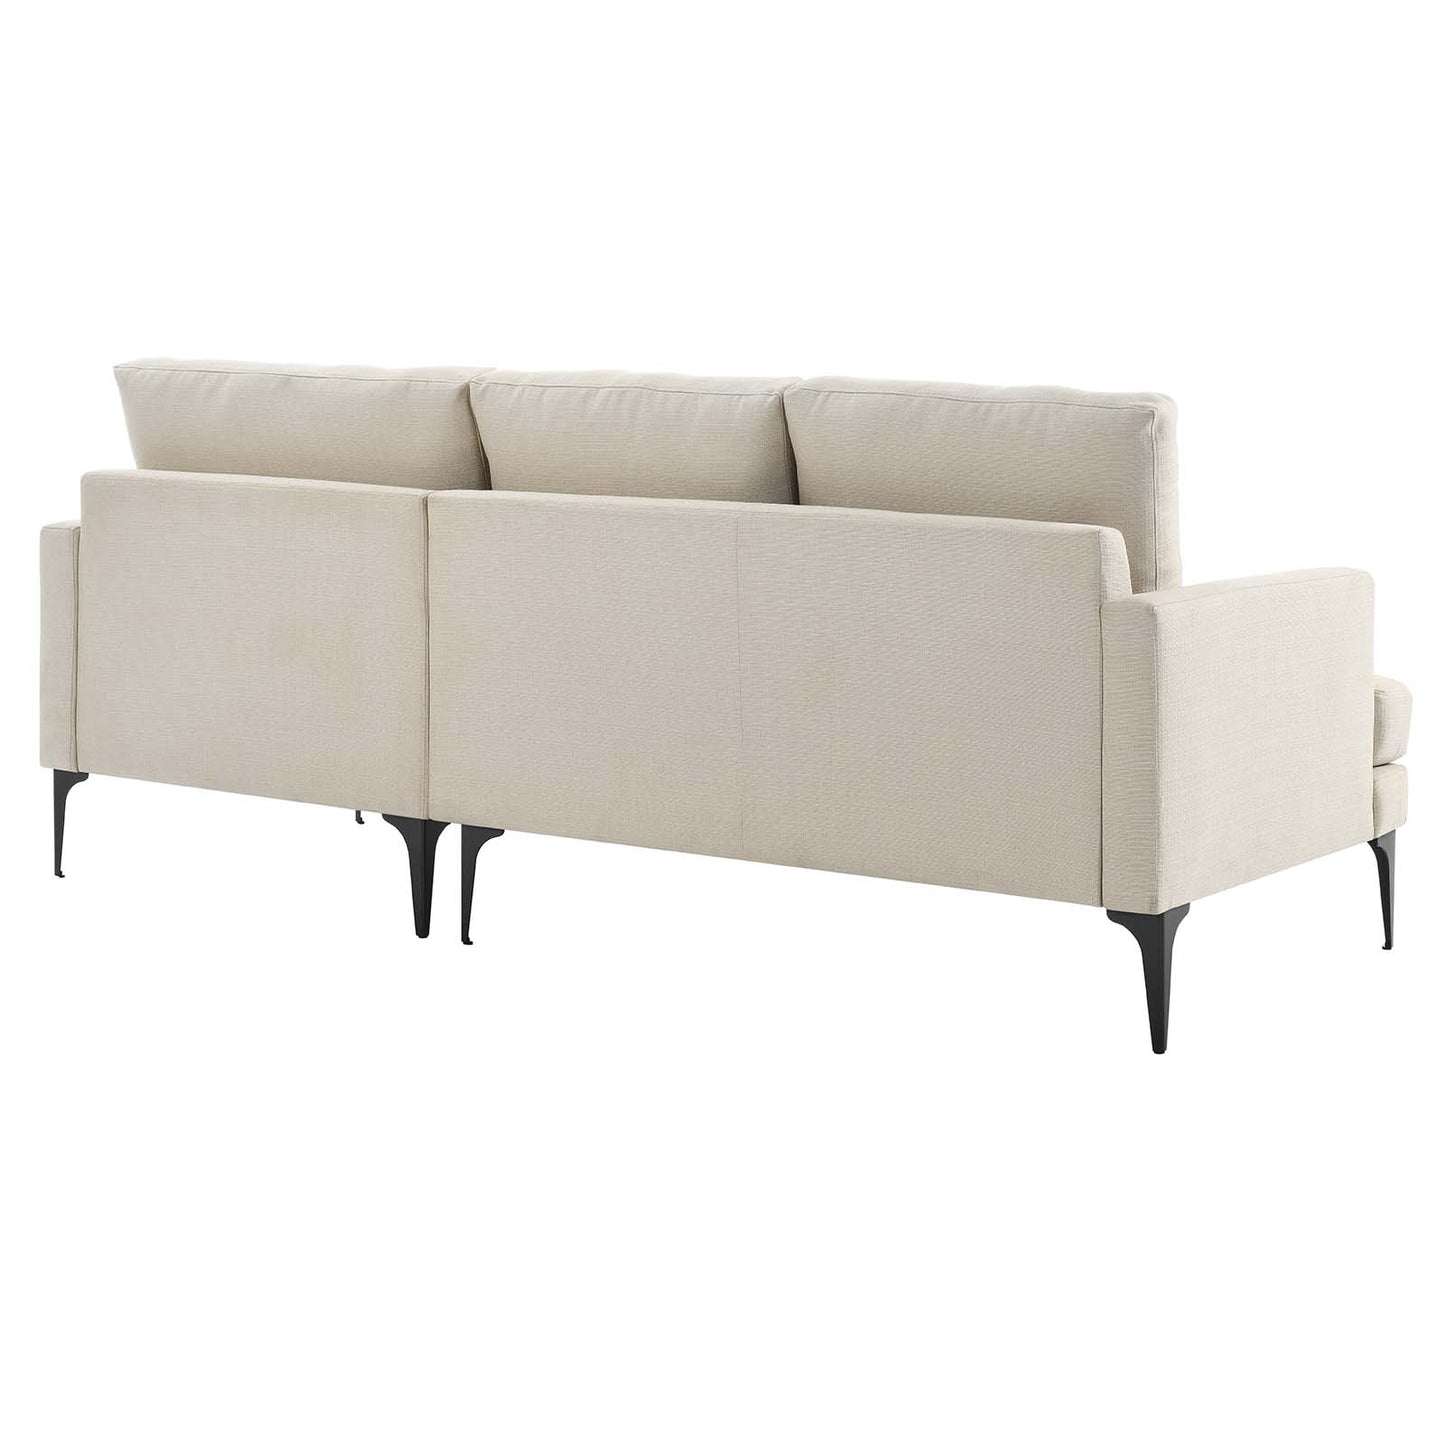 Evermore Right-Facing Upholstered Fabric Sectional Sofa Beige EEI-6012-BEI